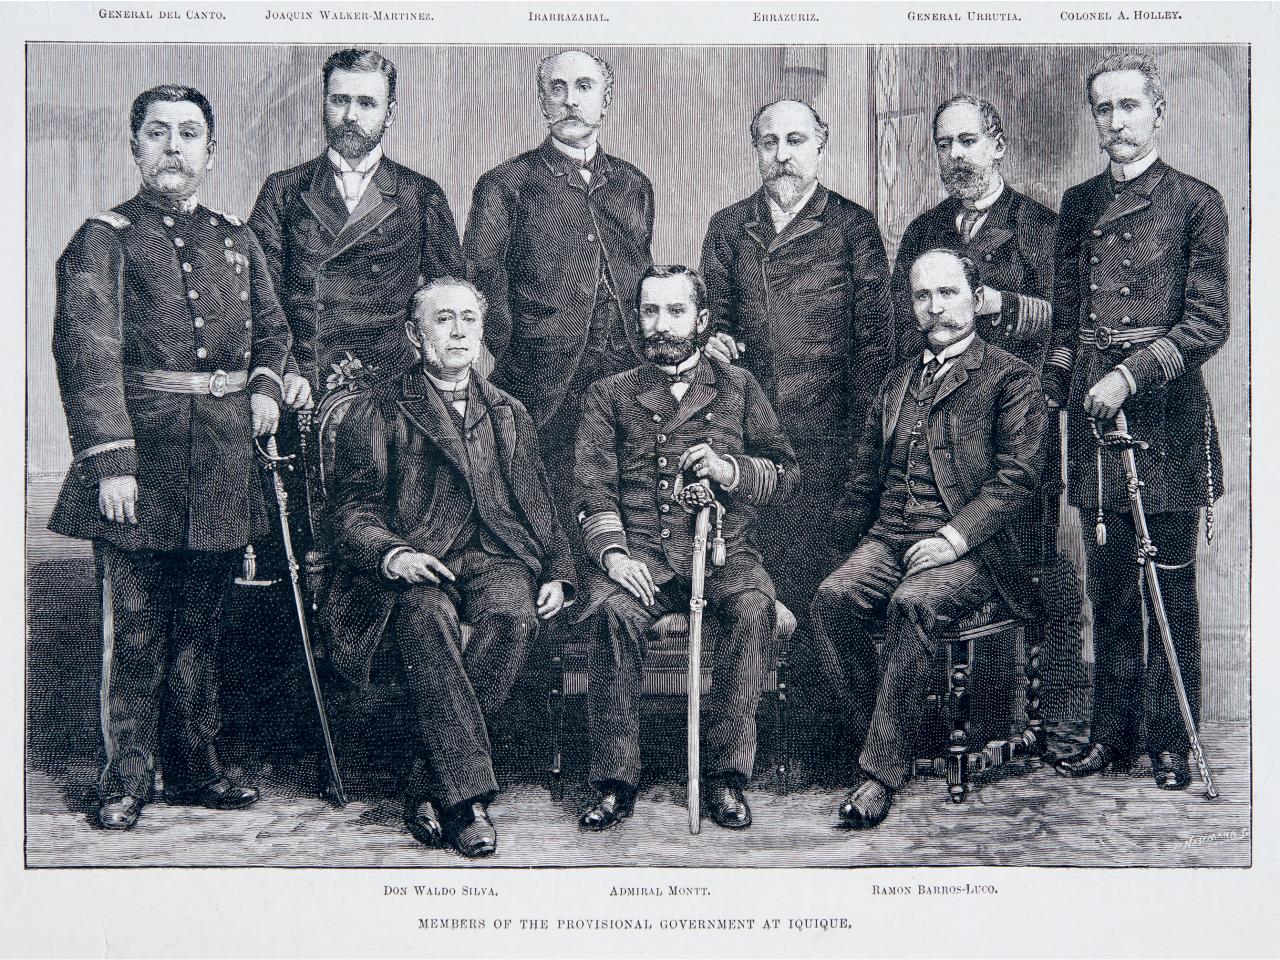 Members of the Provisional Government at Iquique